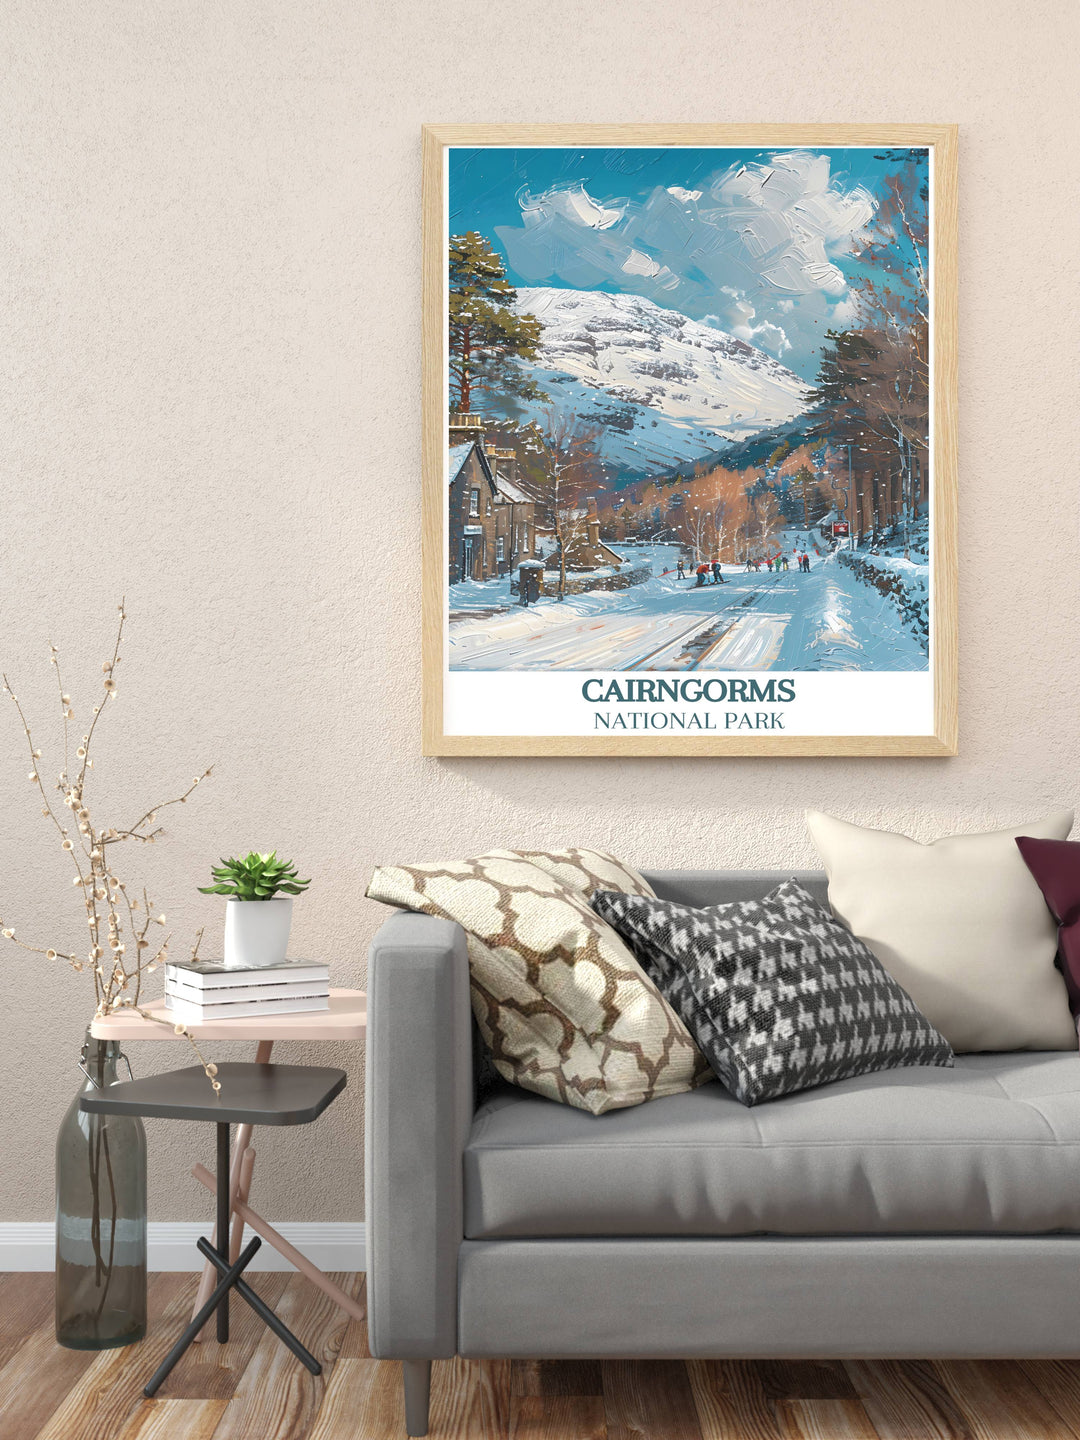 Cairngorm Mountain Travel Poster showcasing the iconic peak amidst the Cairngorms. Ideal for wall art and gifts, this print brings the natural splendor of Scotland into your home.